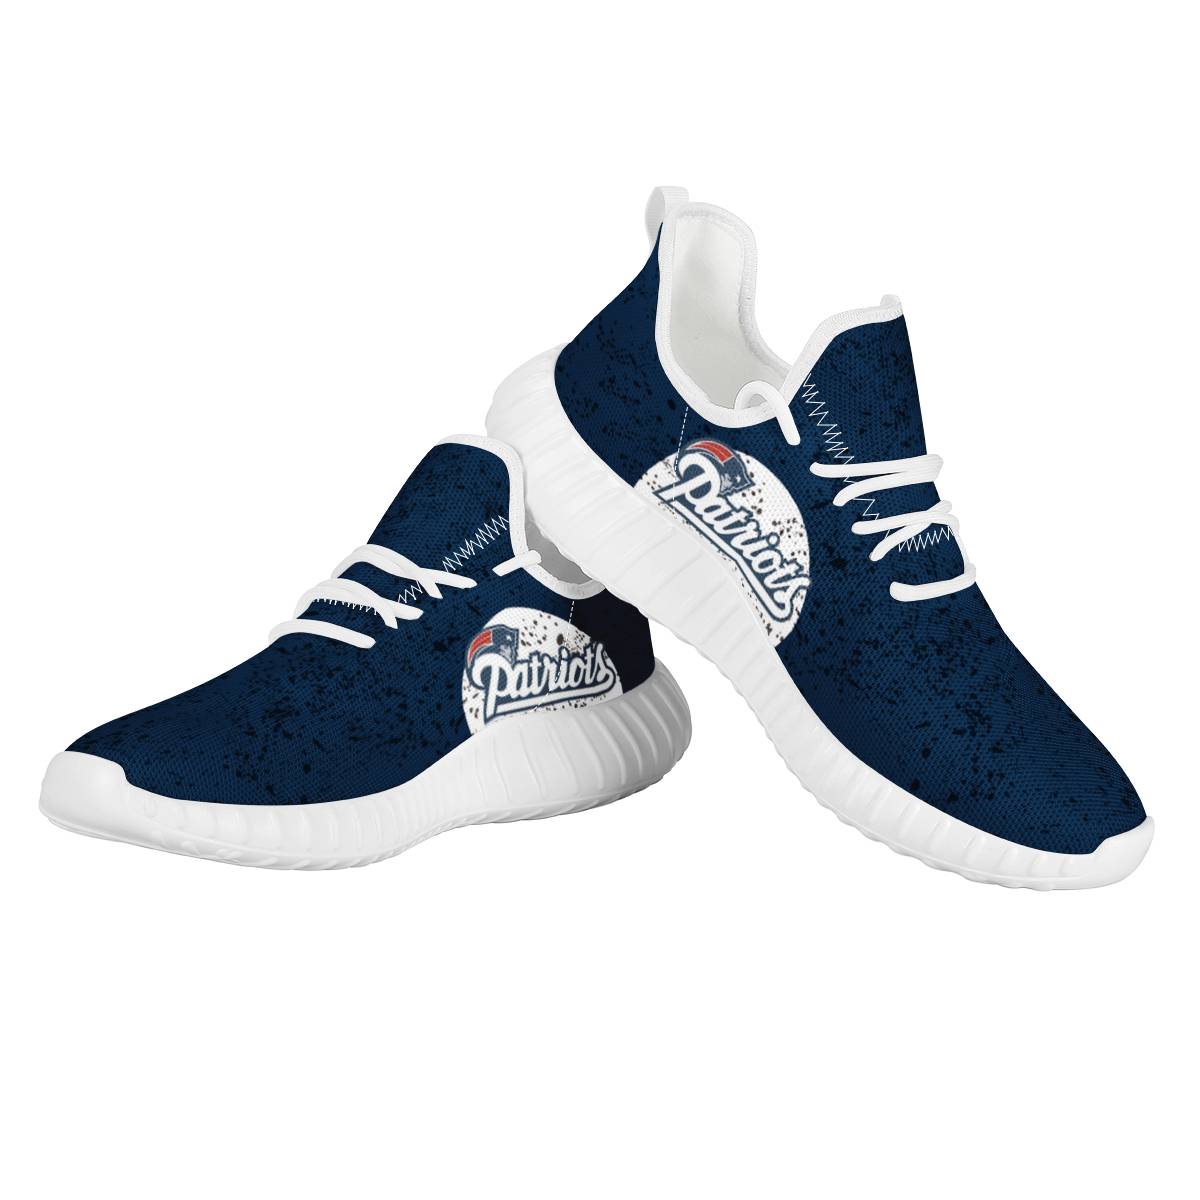 Men's New England Patriots Mesh Knit Sneakers/Shoes 018